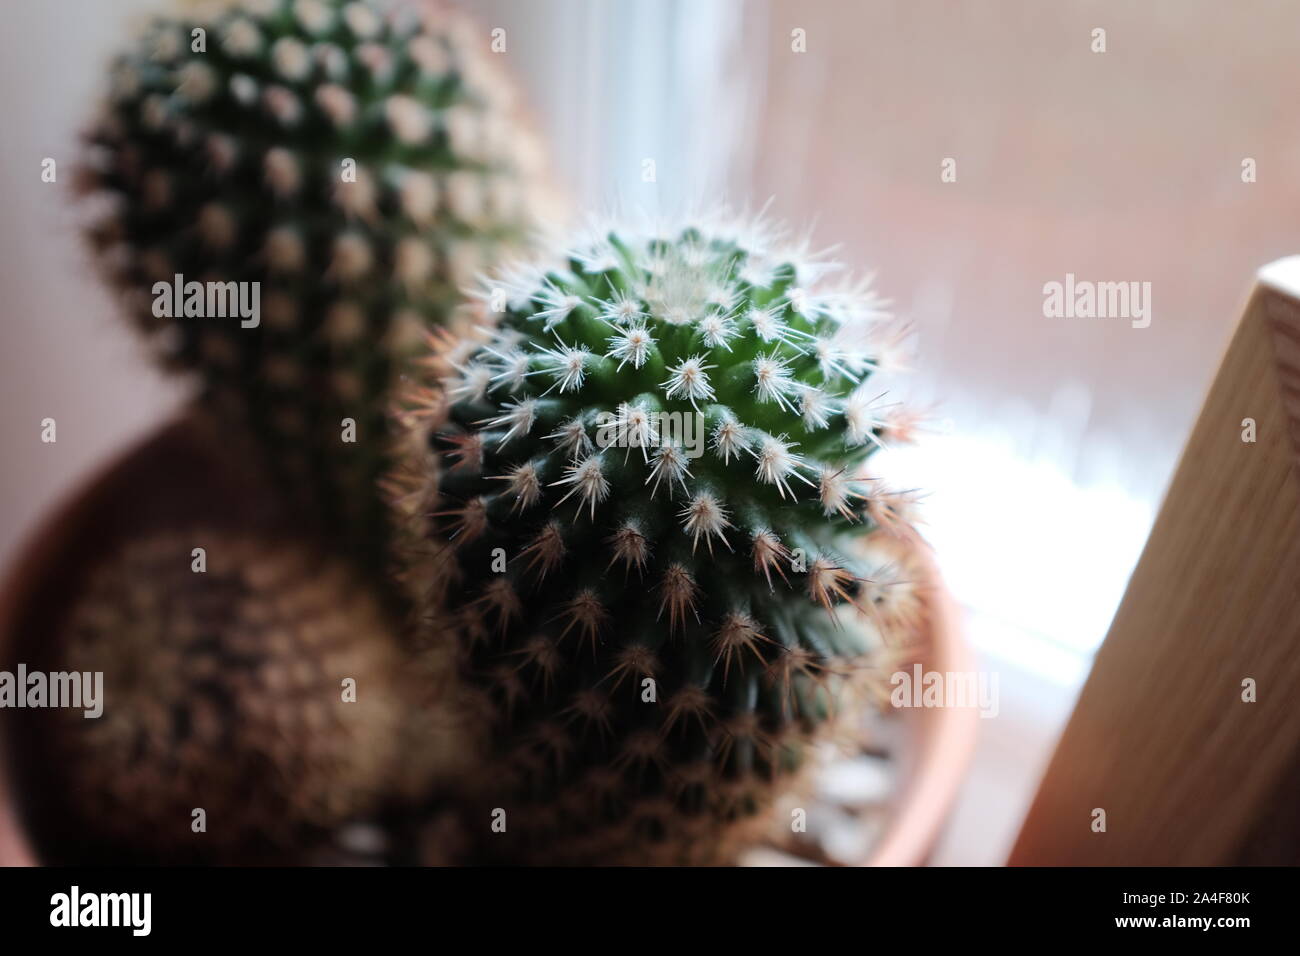 Top down view of a small Cactus growing in a pot on a window sill indoors. Stock Photo